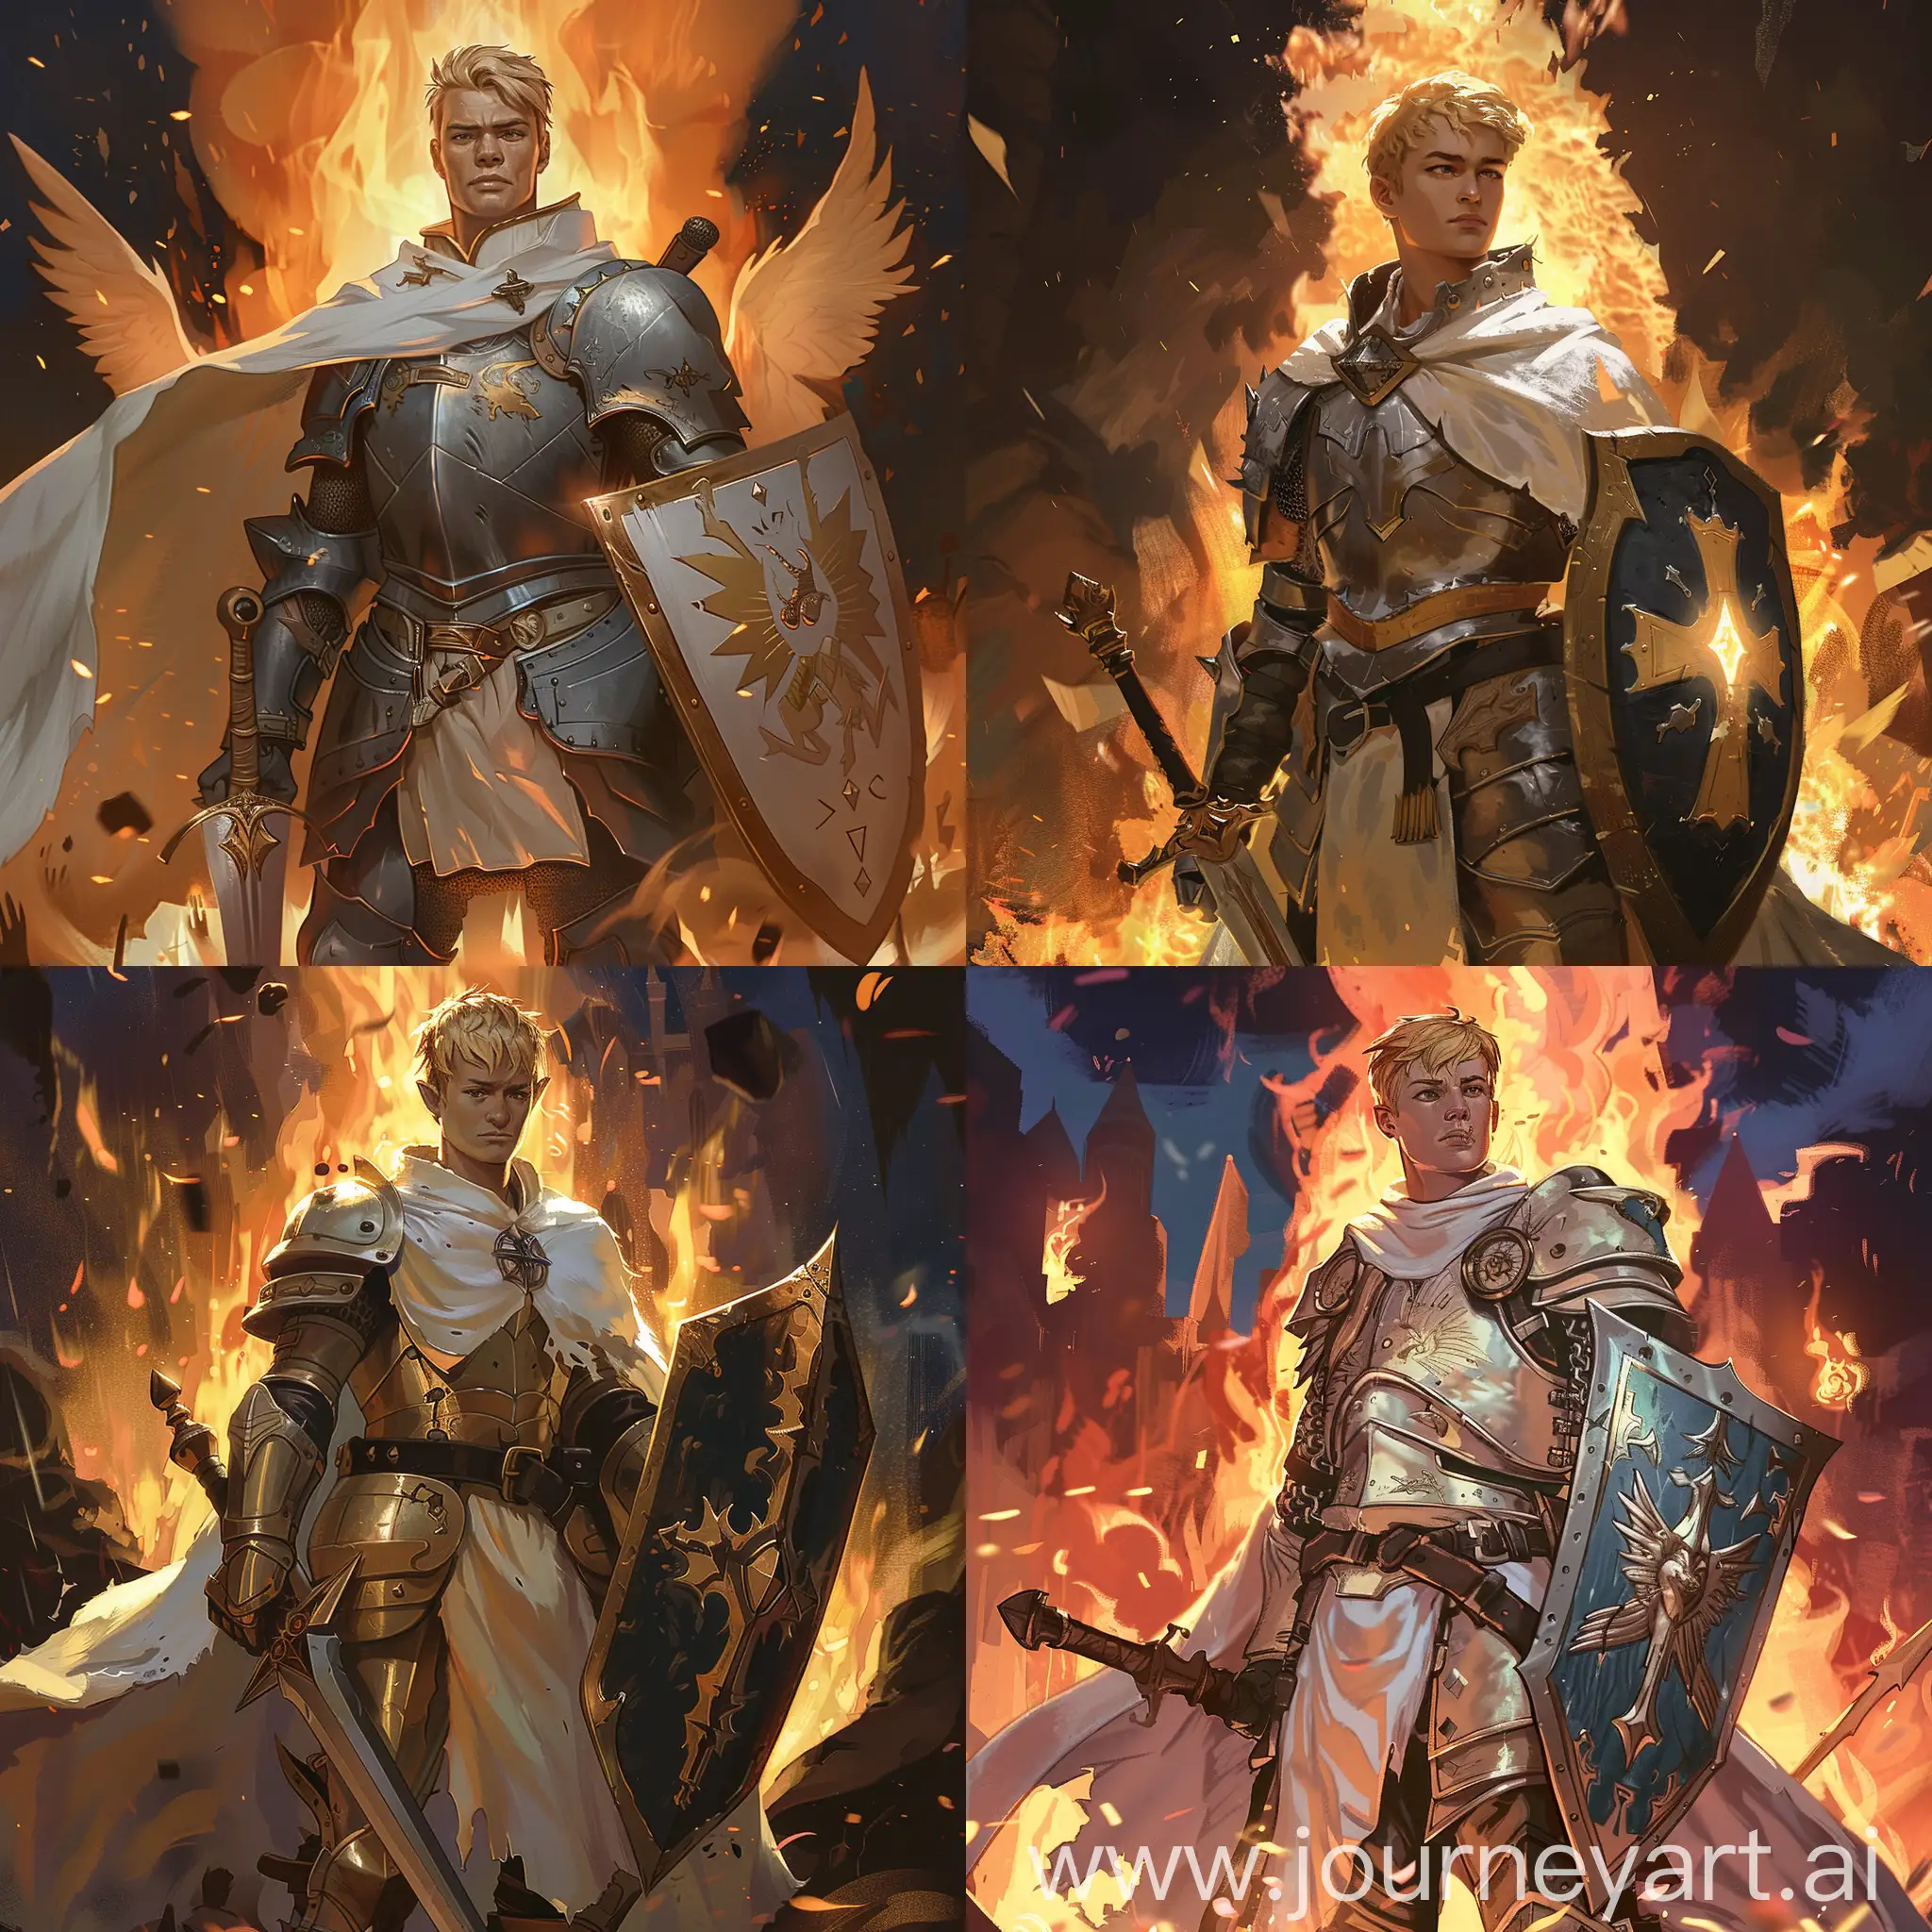 Draw a character from the Dungeons and Dragons universe according to the following description: he is young male, human, with short blond hair, paladin of a light deity, tall, wearing knight's armor with a white cloak, he has a tower shield and a sword, against the backdrop of a large fire in the night